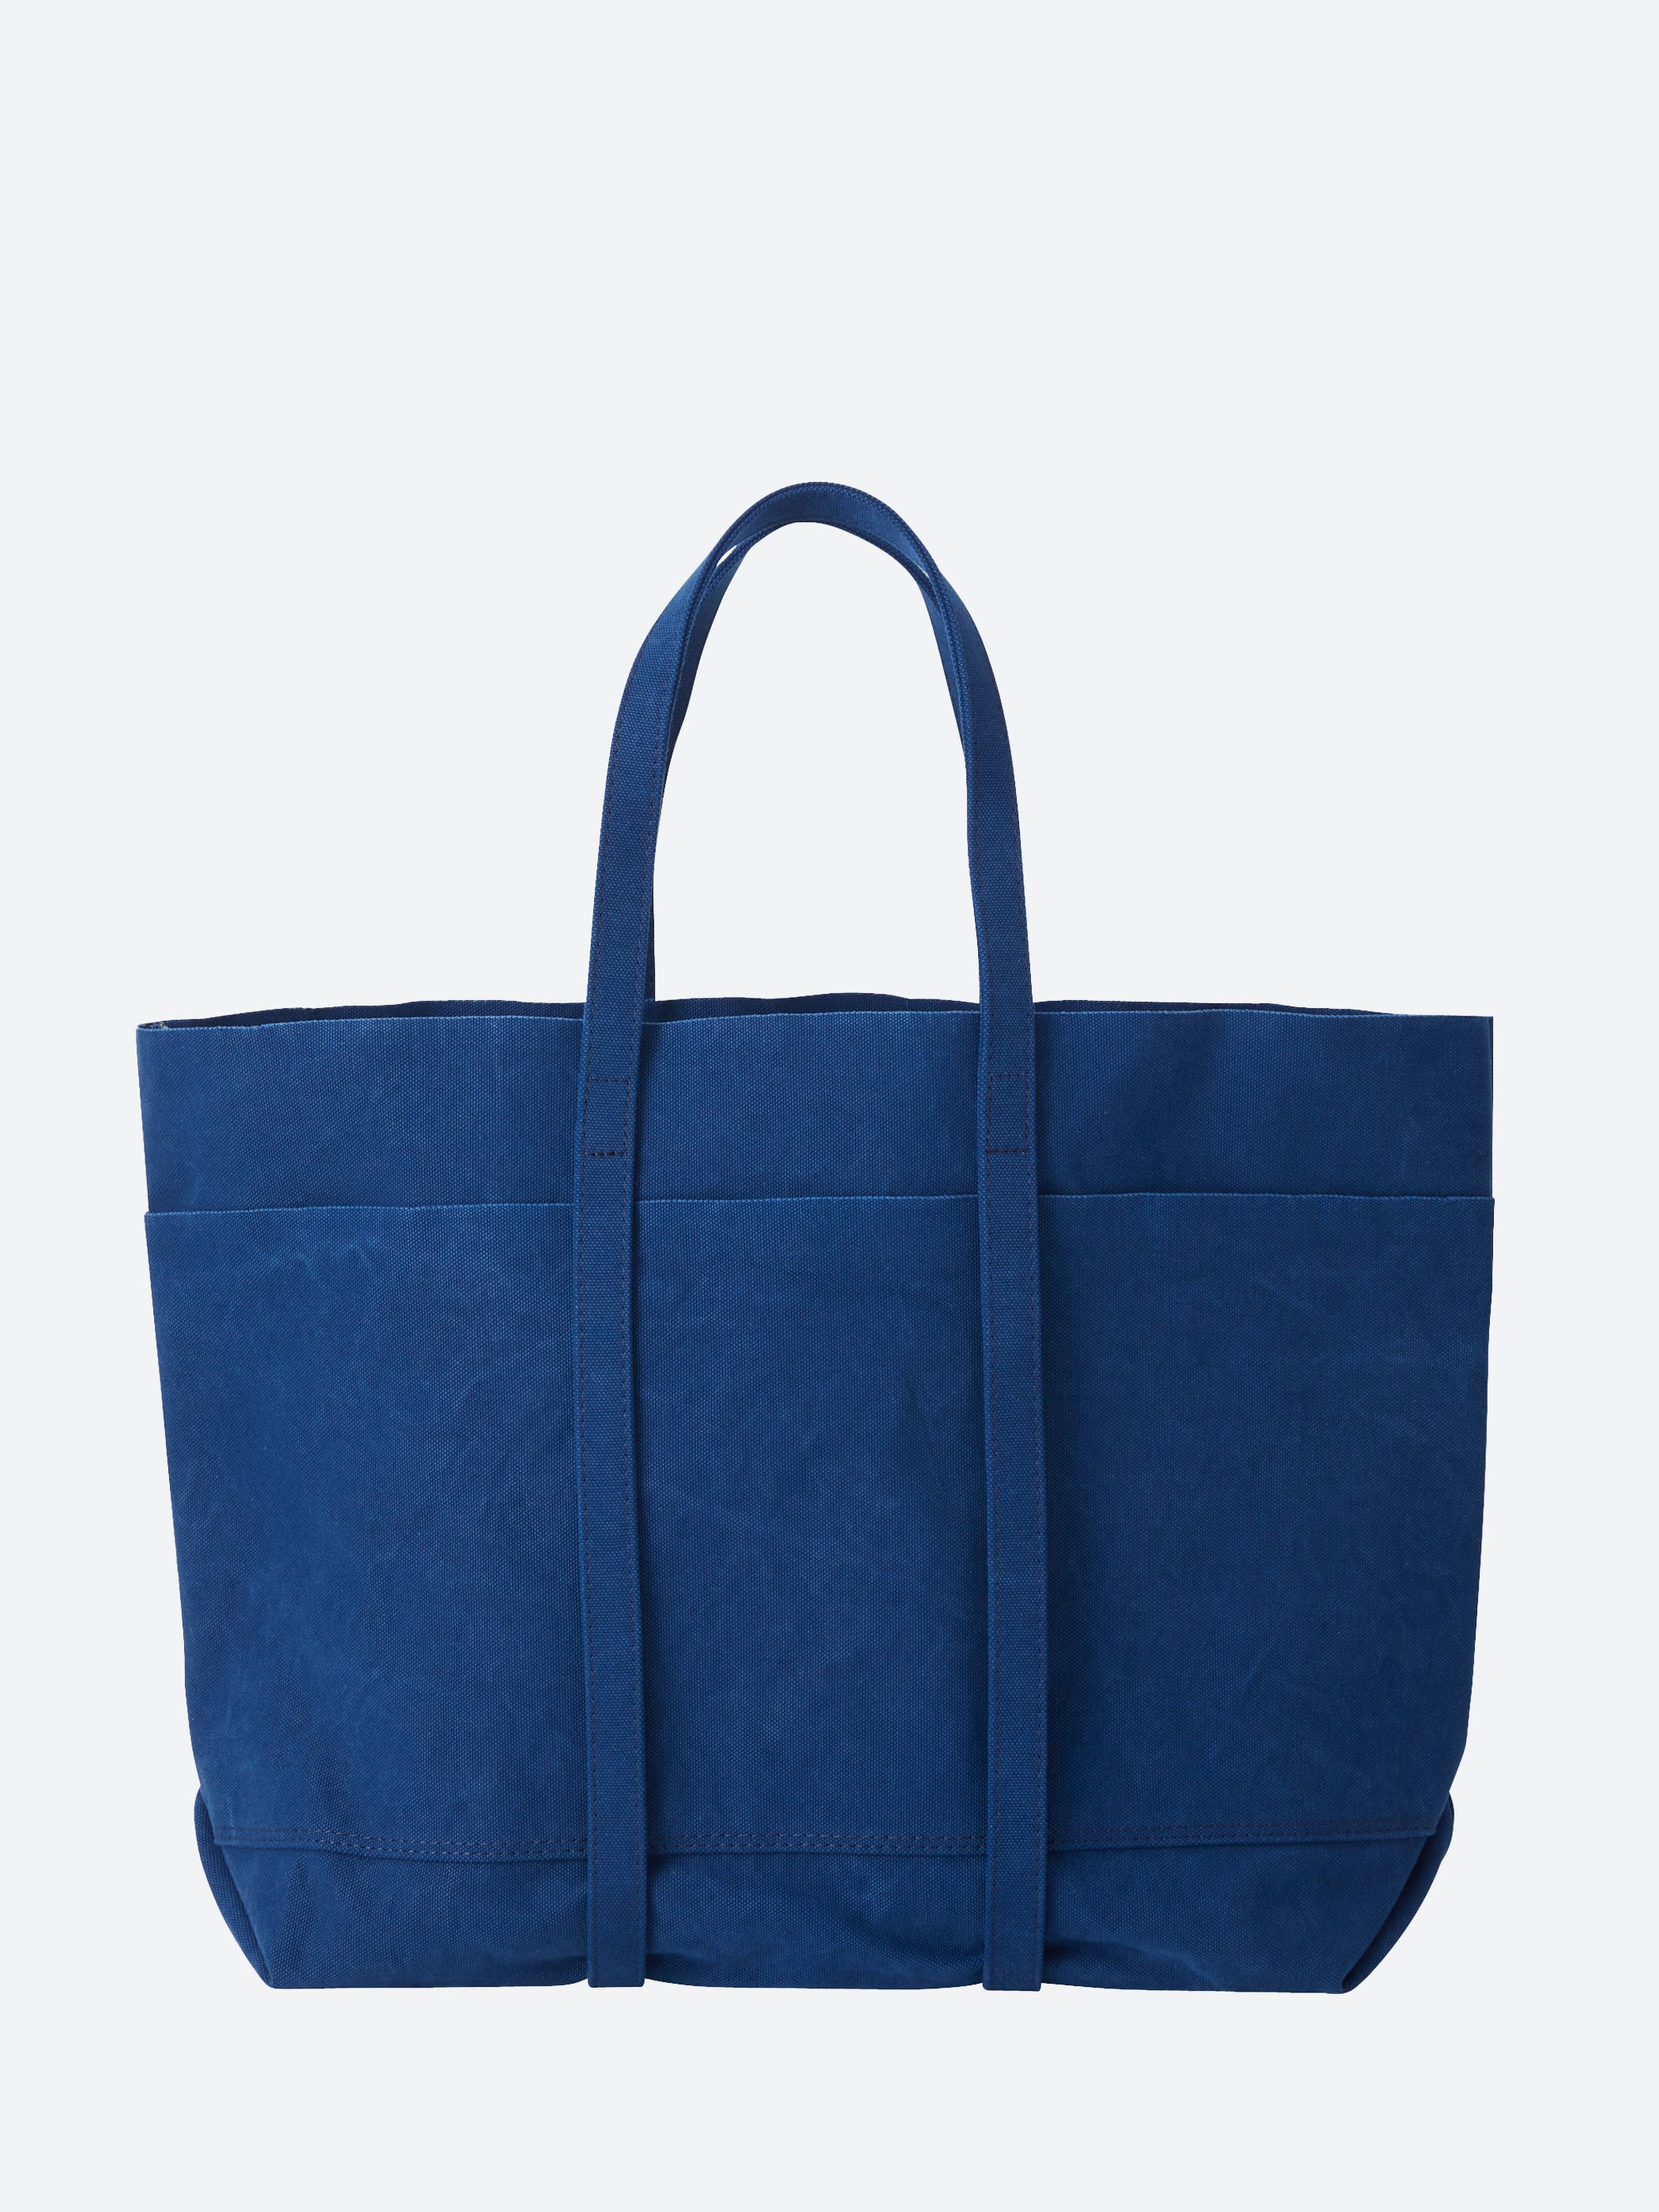 Medium Washed Canvas Tote